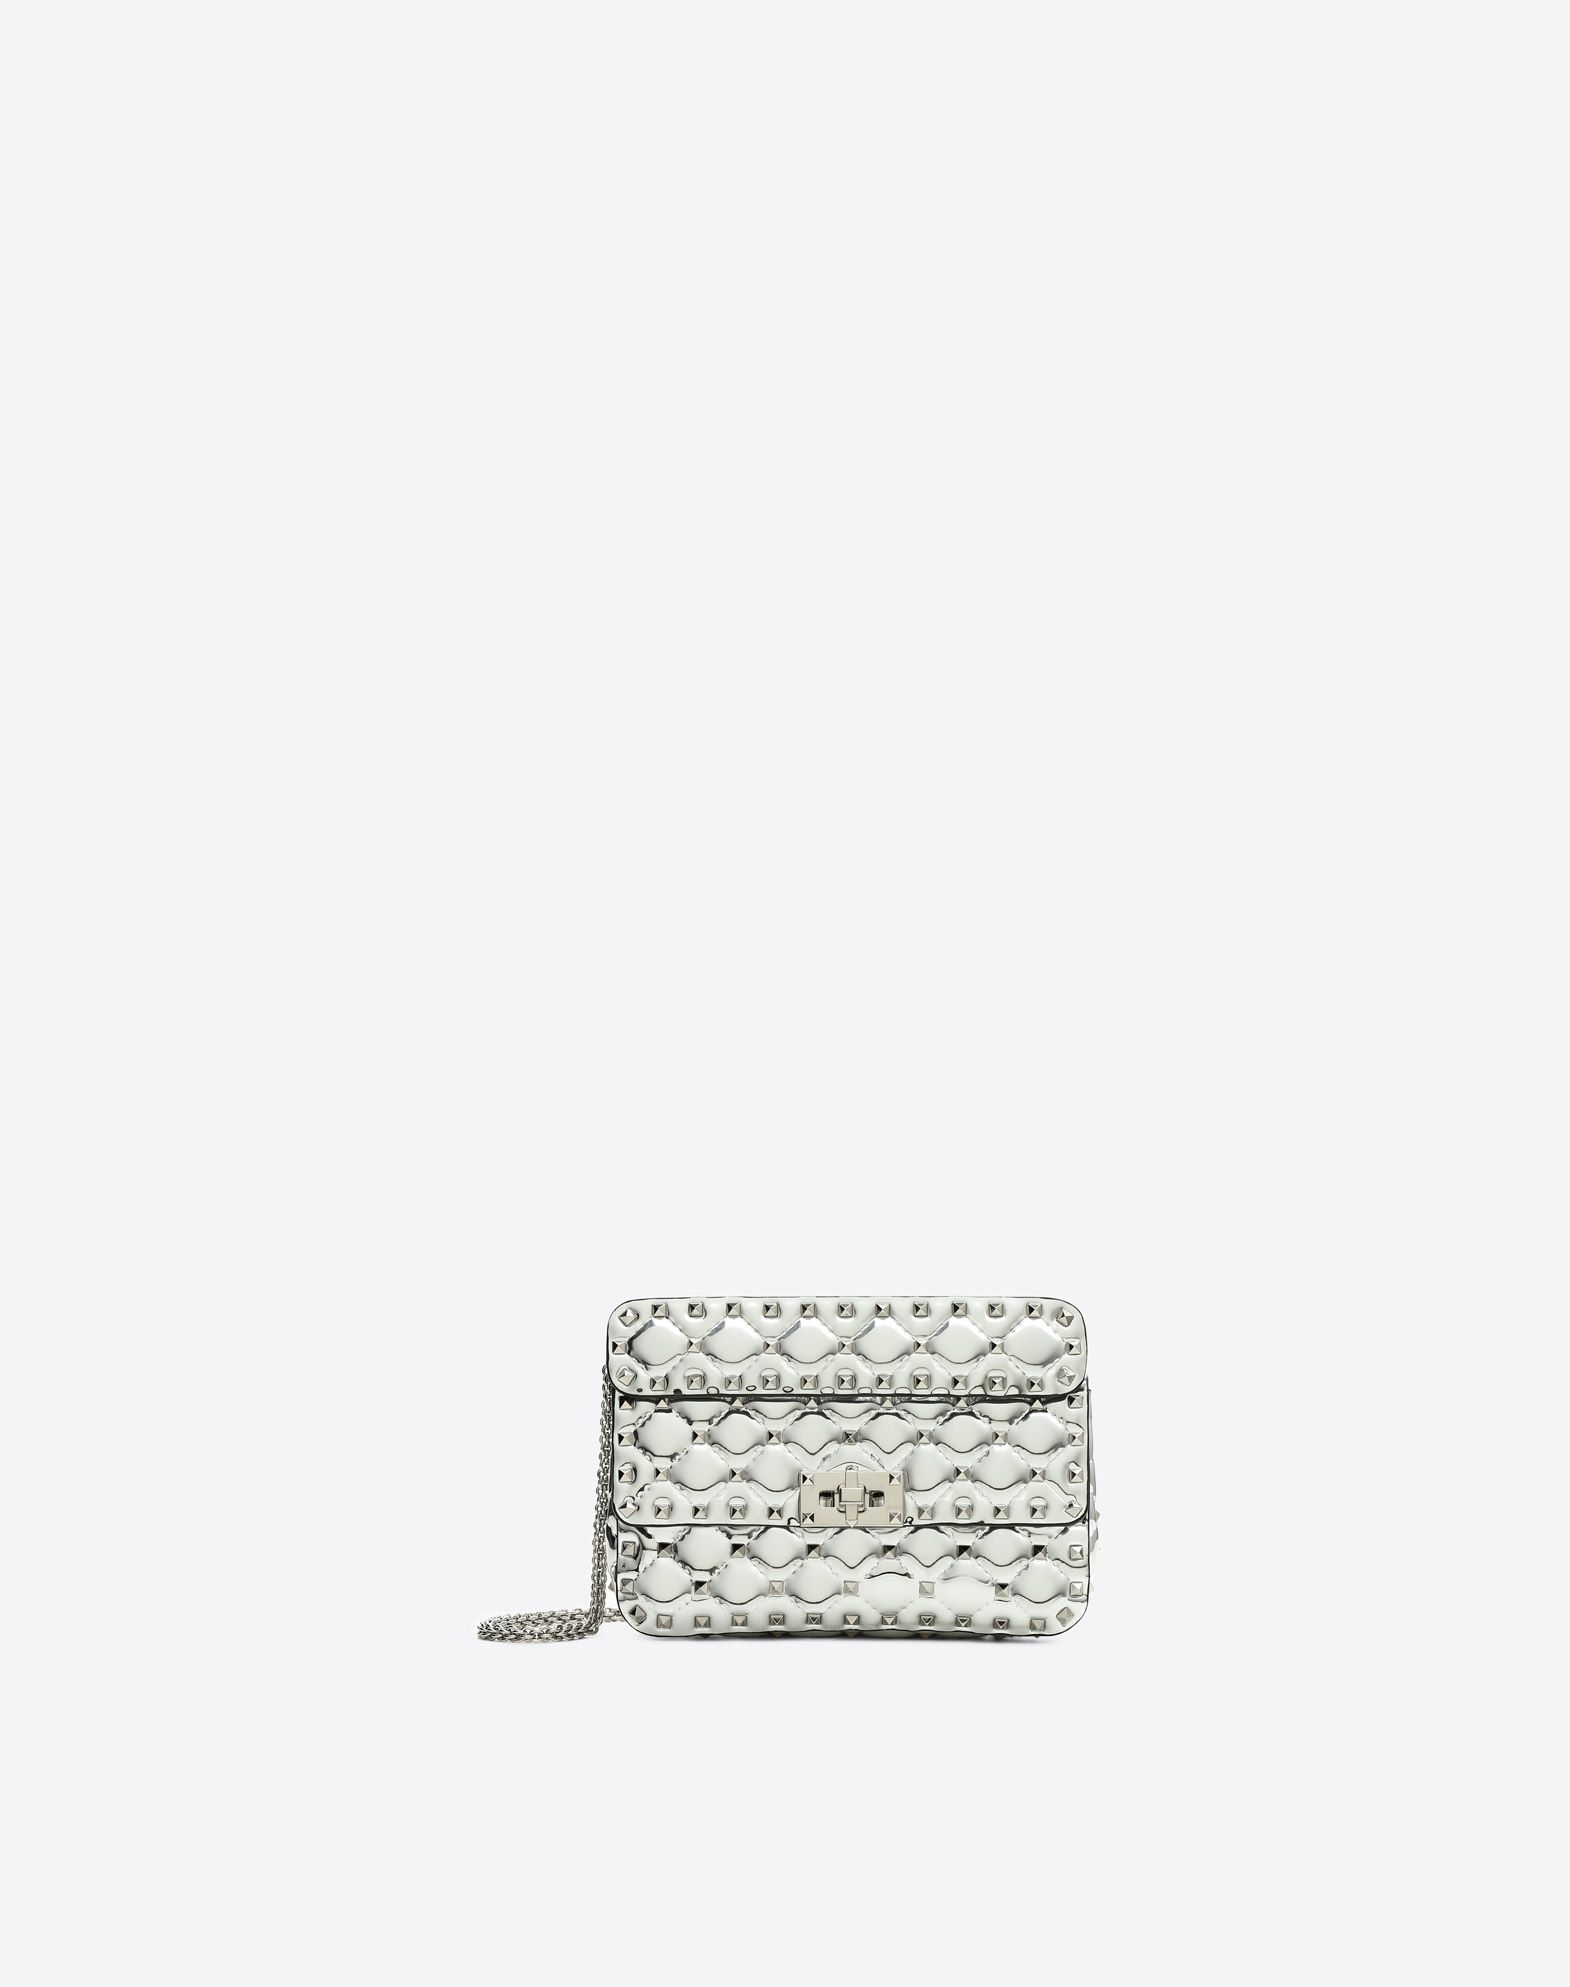 Afgang ophobe Indigenous Shop Valentino Small Metallic Rockstud Spike Bag In Silver